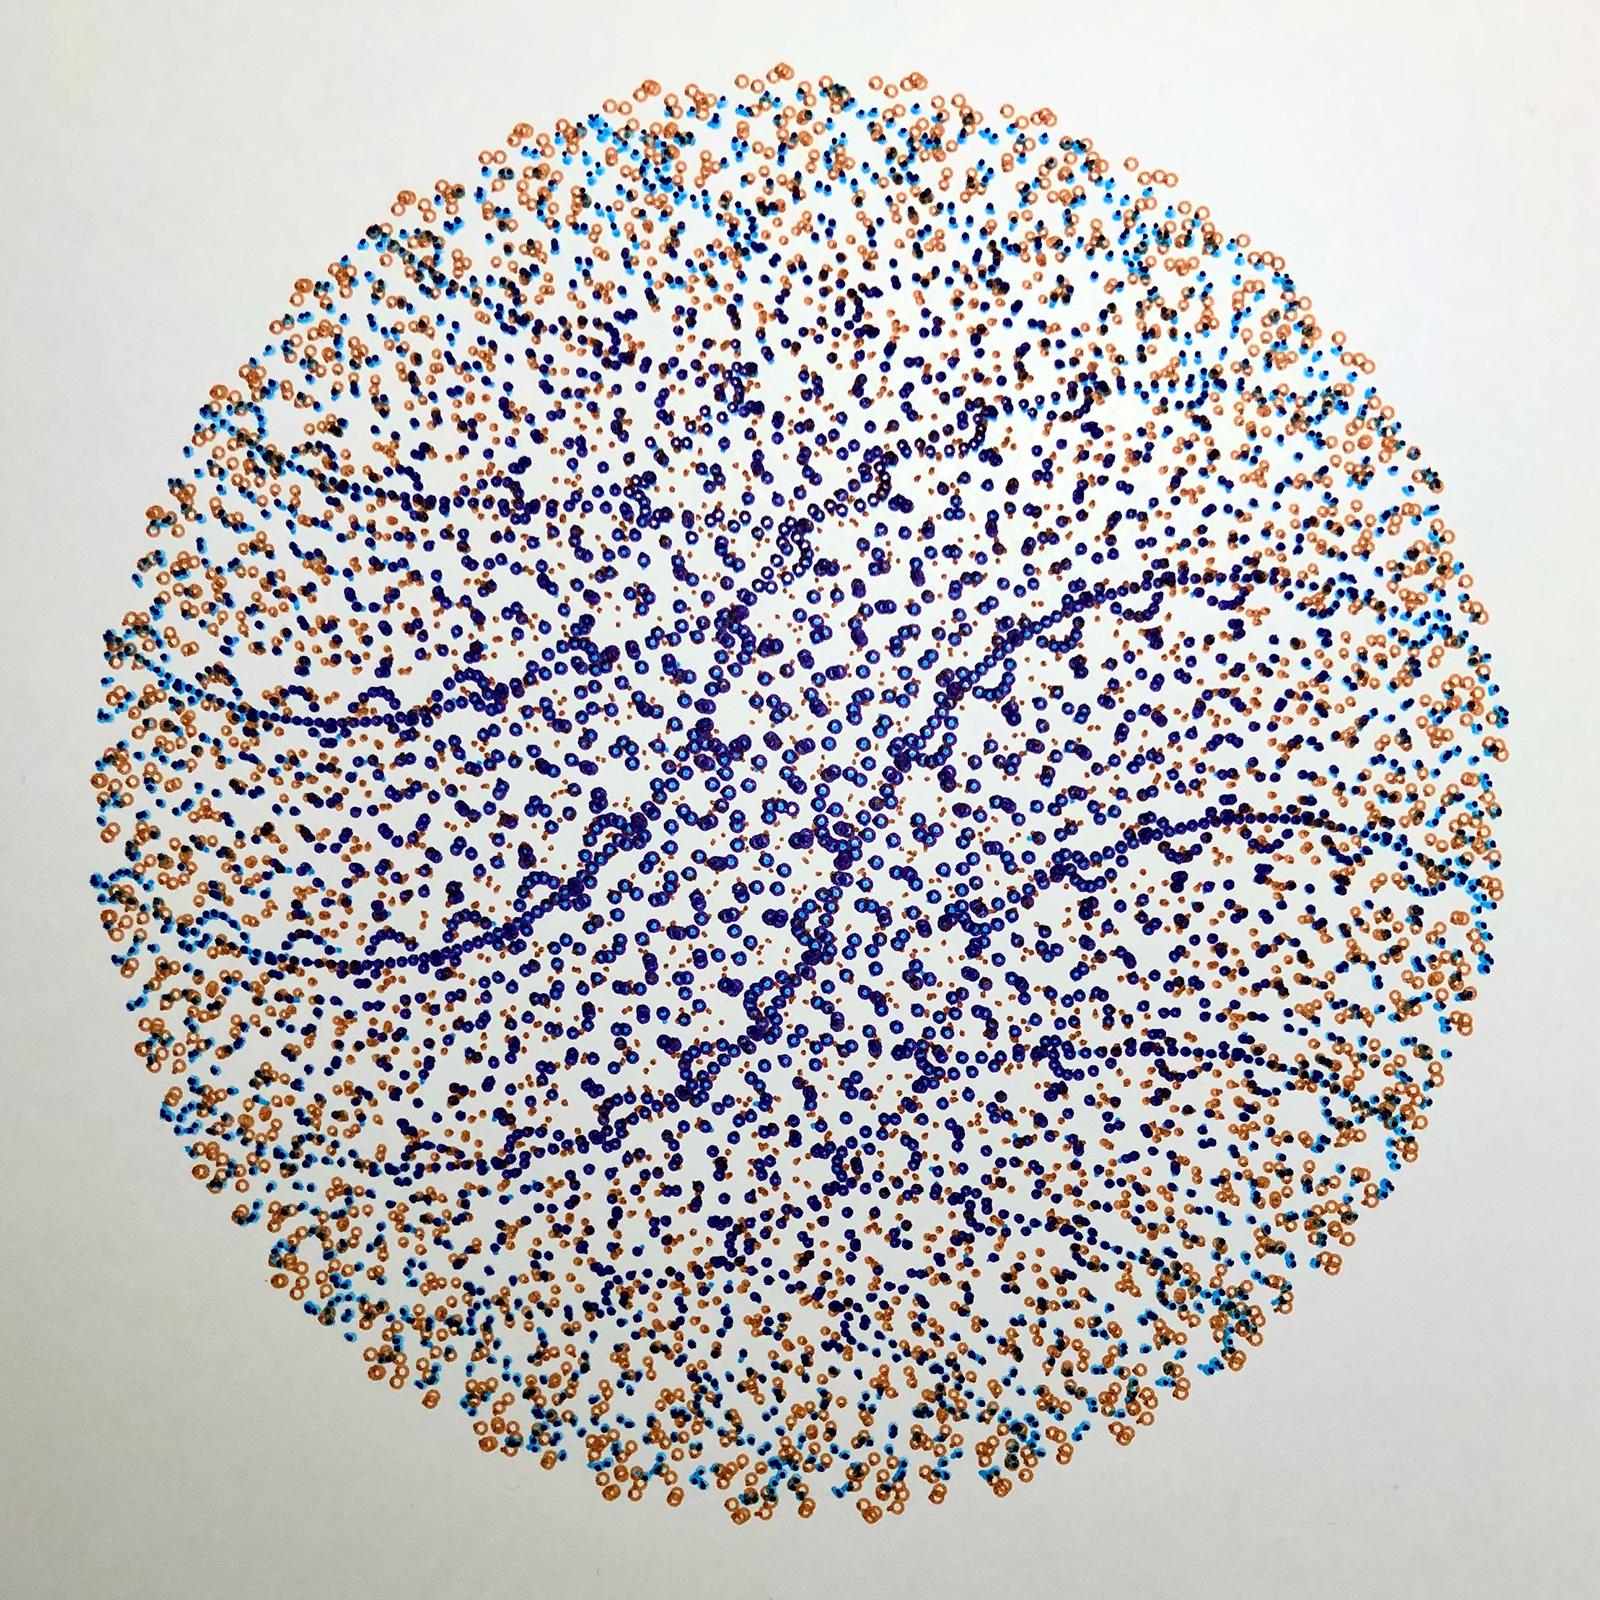 Intricate patterns are made up from thousands of dots in a circular shape. Printed as brown, purple and light blue on white paper